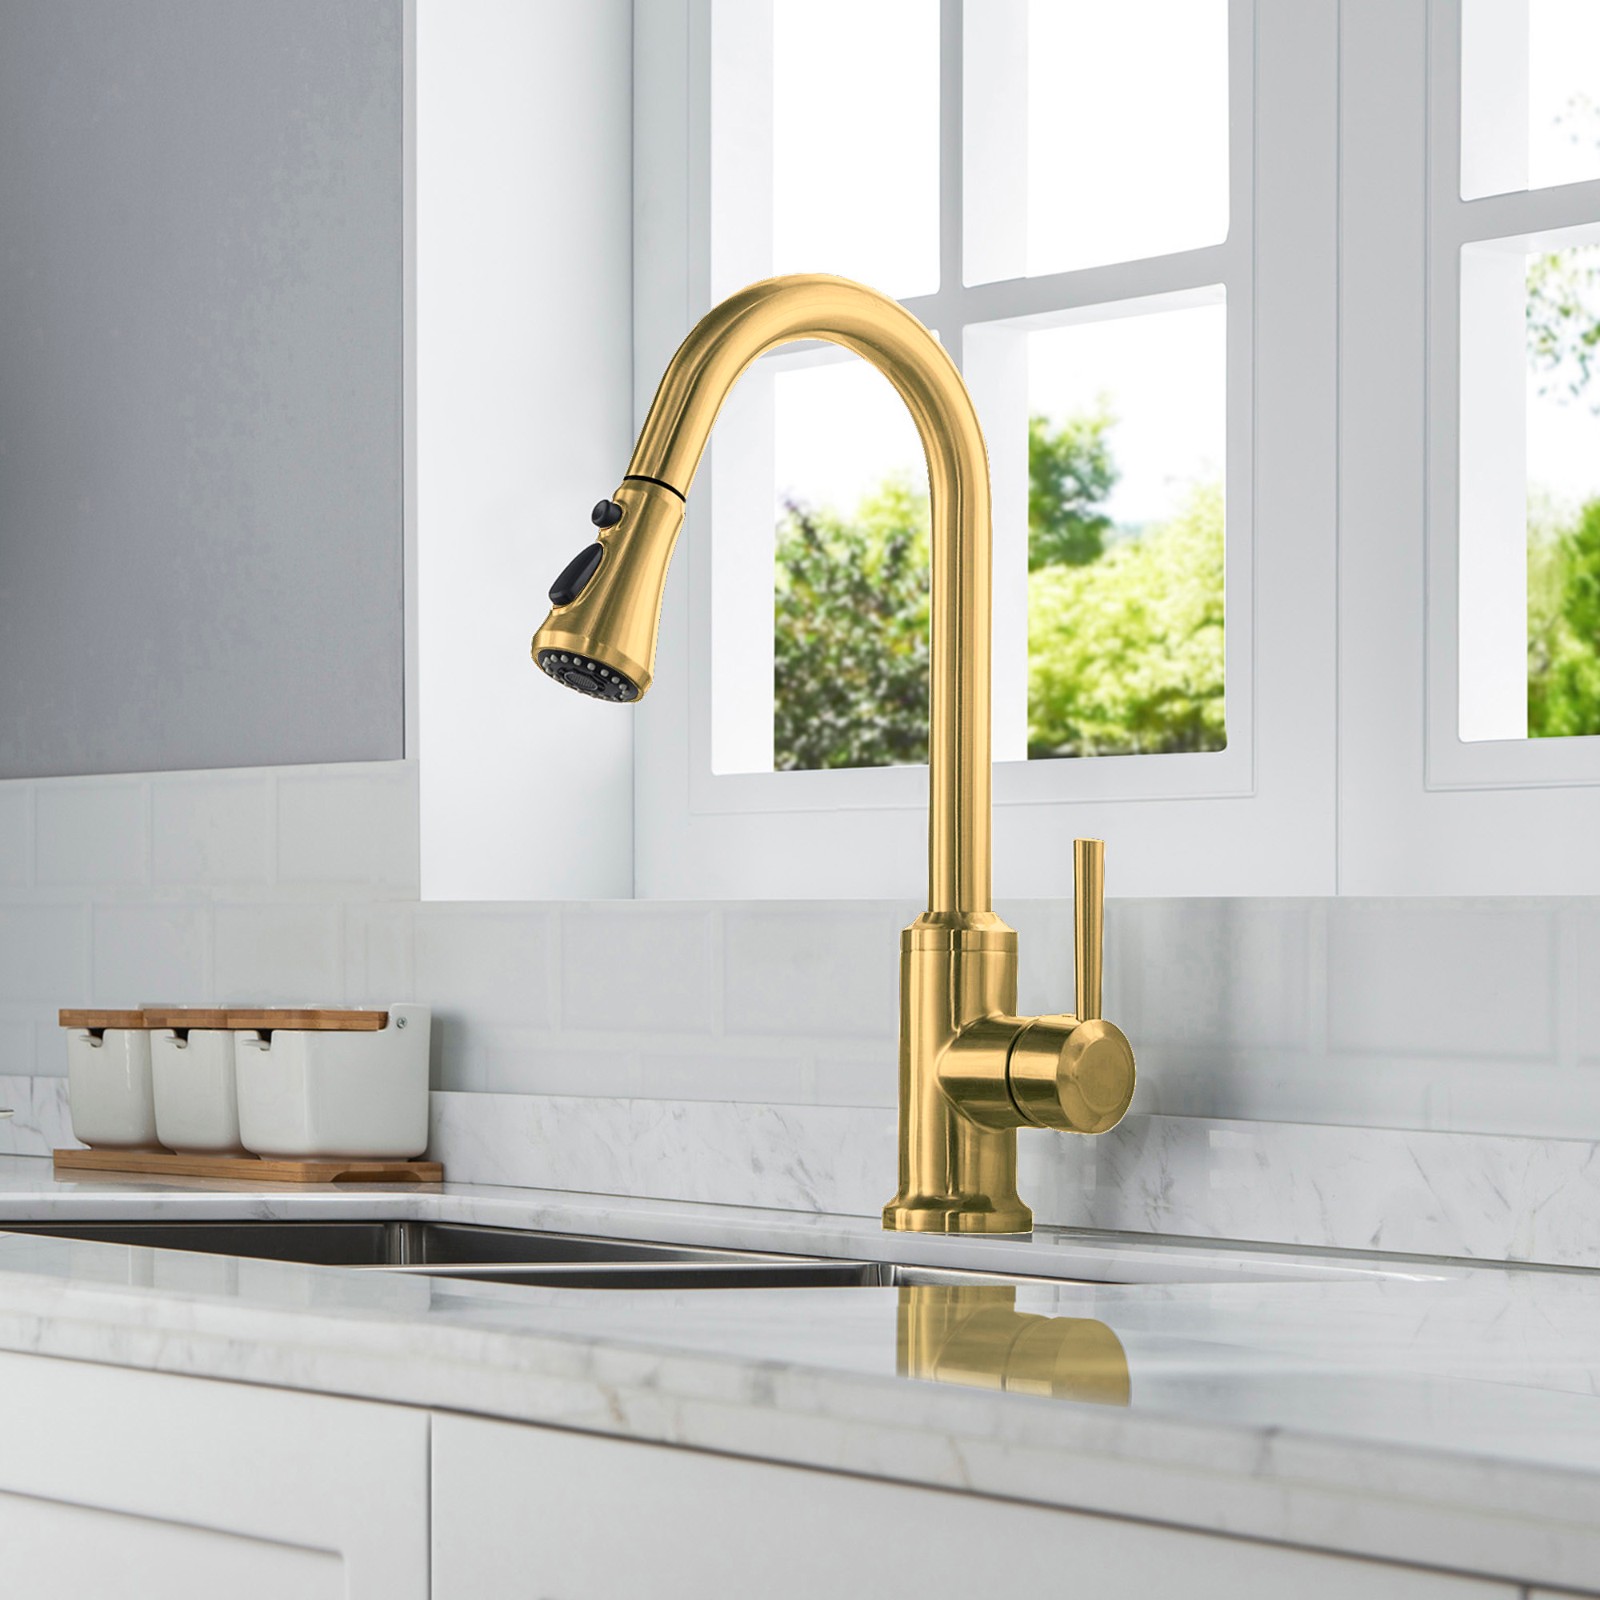  WOODBRIDGE WK101201BG Stainless Steel Single Handle Pull Down Kitchen Faucet in Brushed Gold Finish._4986